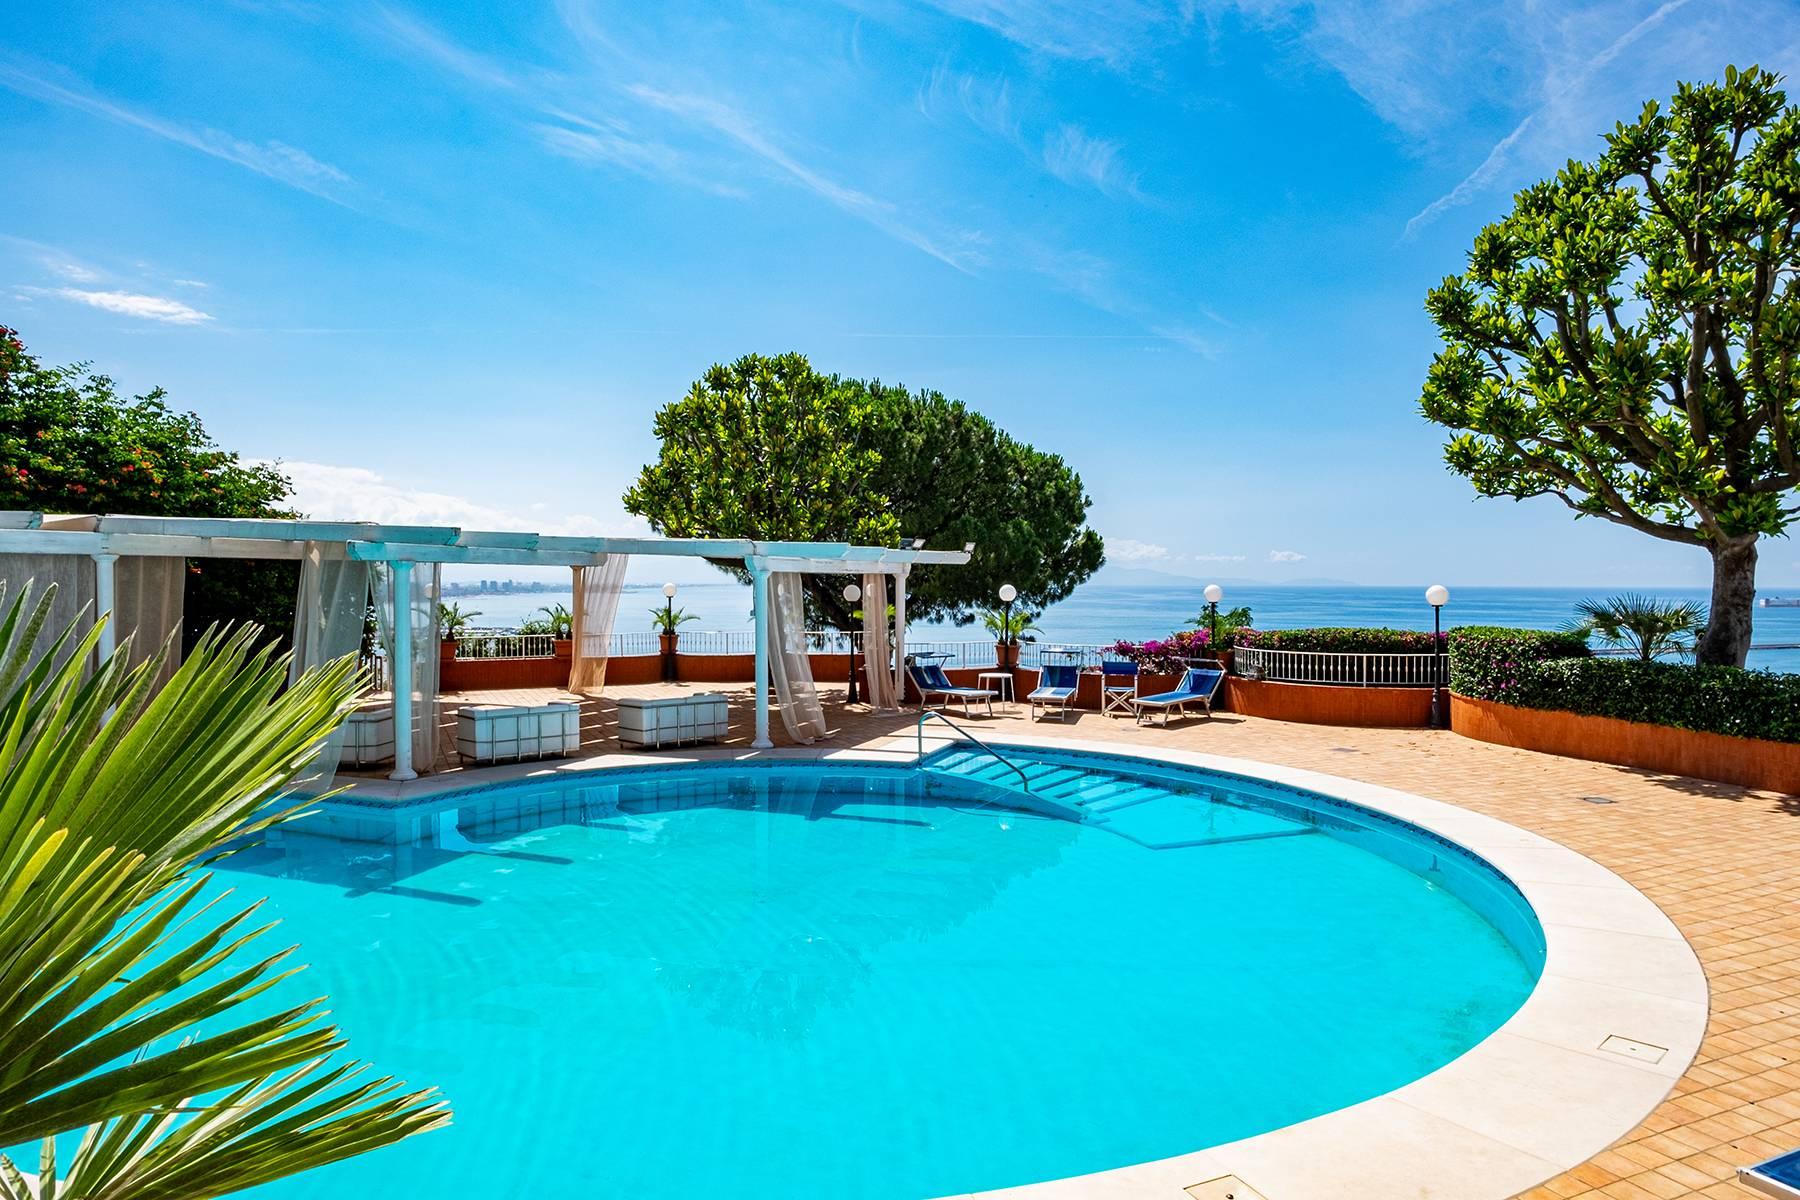 Exclusive villa with panoramic terraces and gardens close to Salerno and Vietri sul Mare - 1